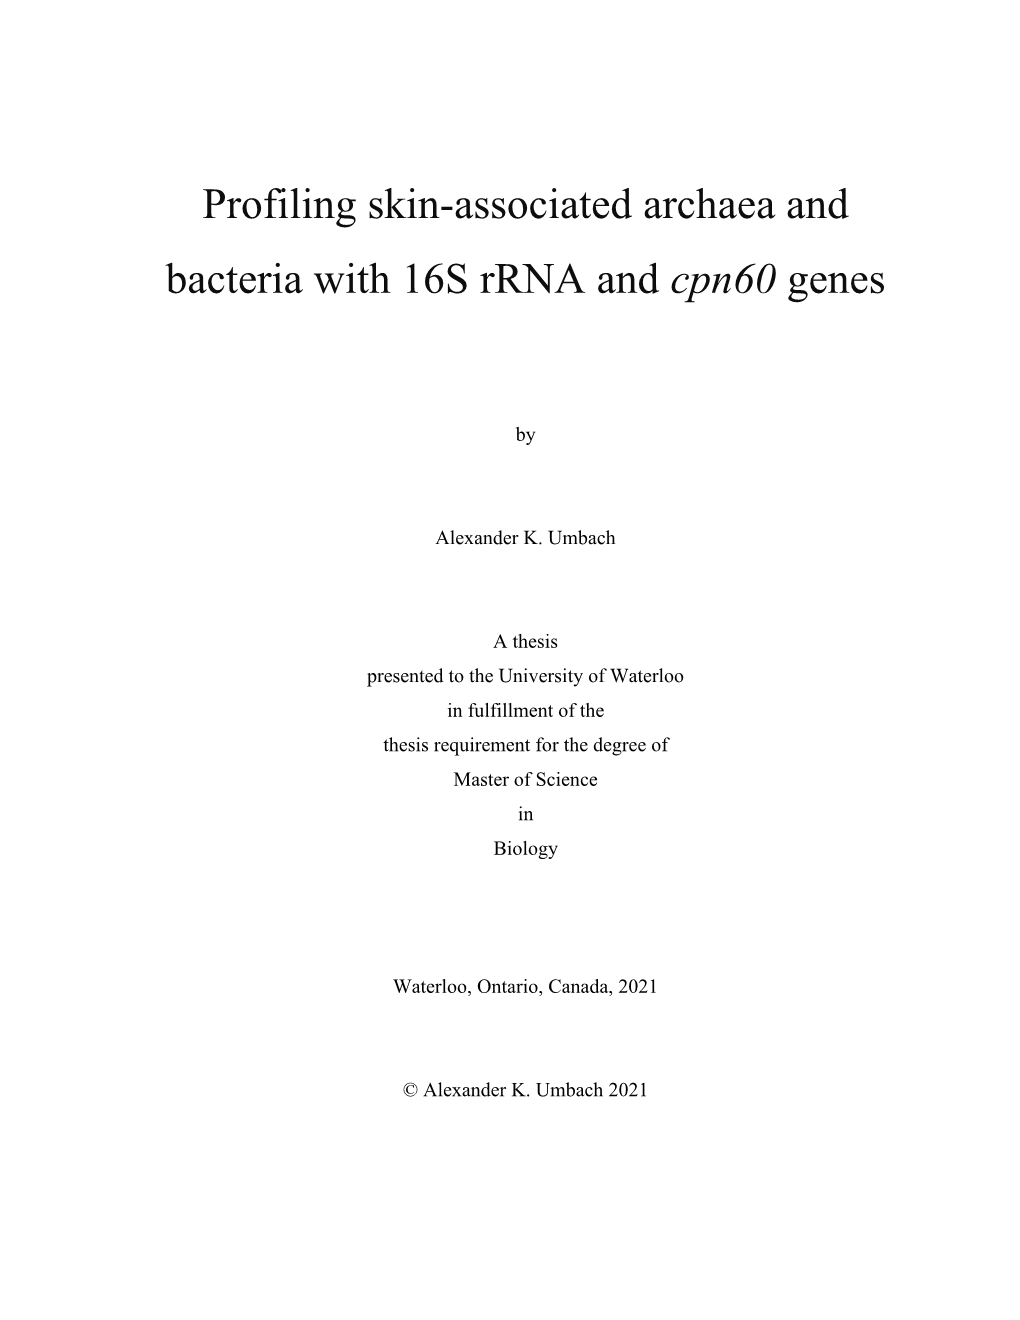 Profiling Skin-Associated Archaea and Bacteria with 16S Rrna and Cpn60 Genes